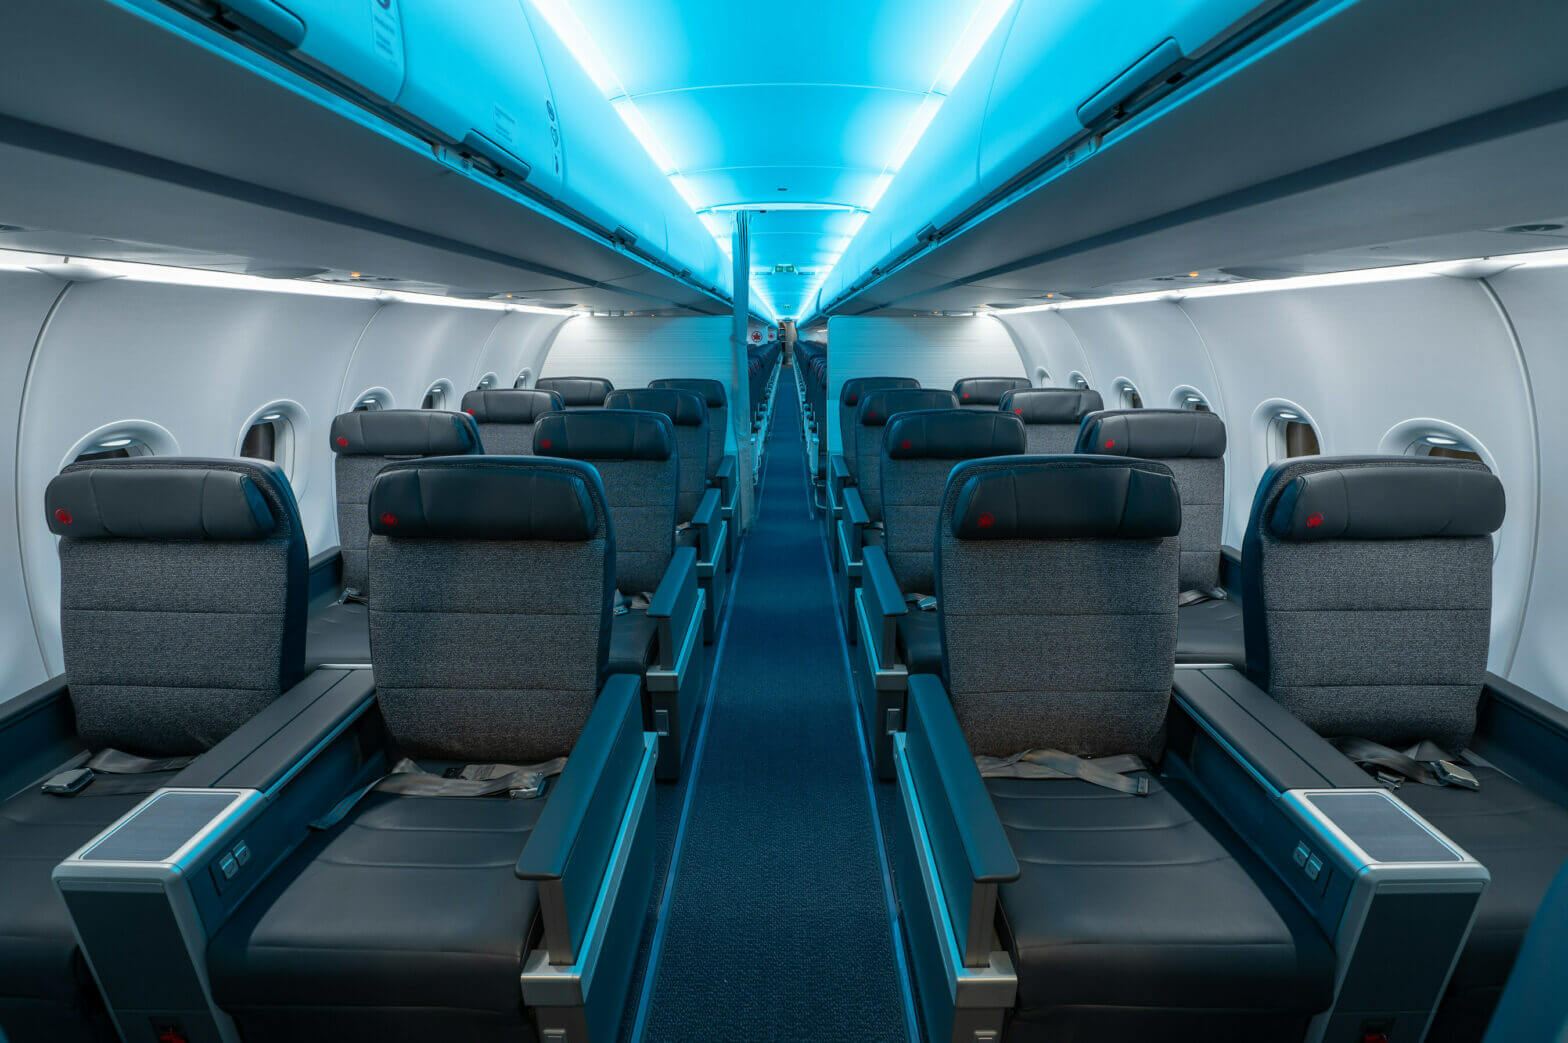 Air Canada unveils first upgraded Airbus A321 all-new interior - Skies Mag